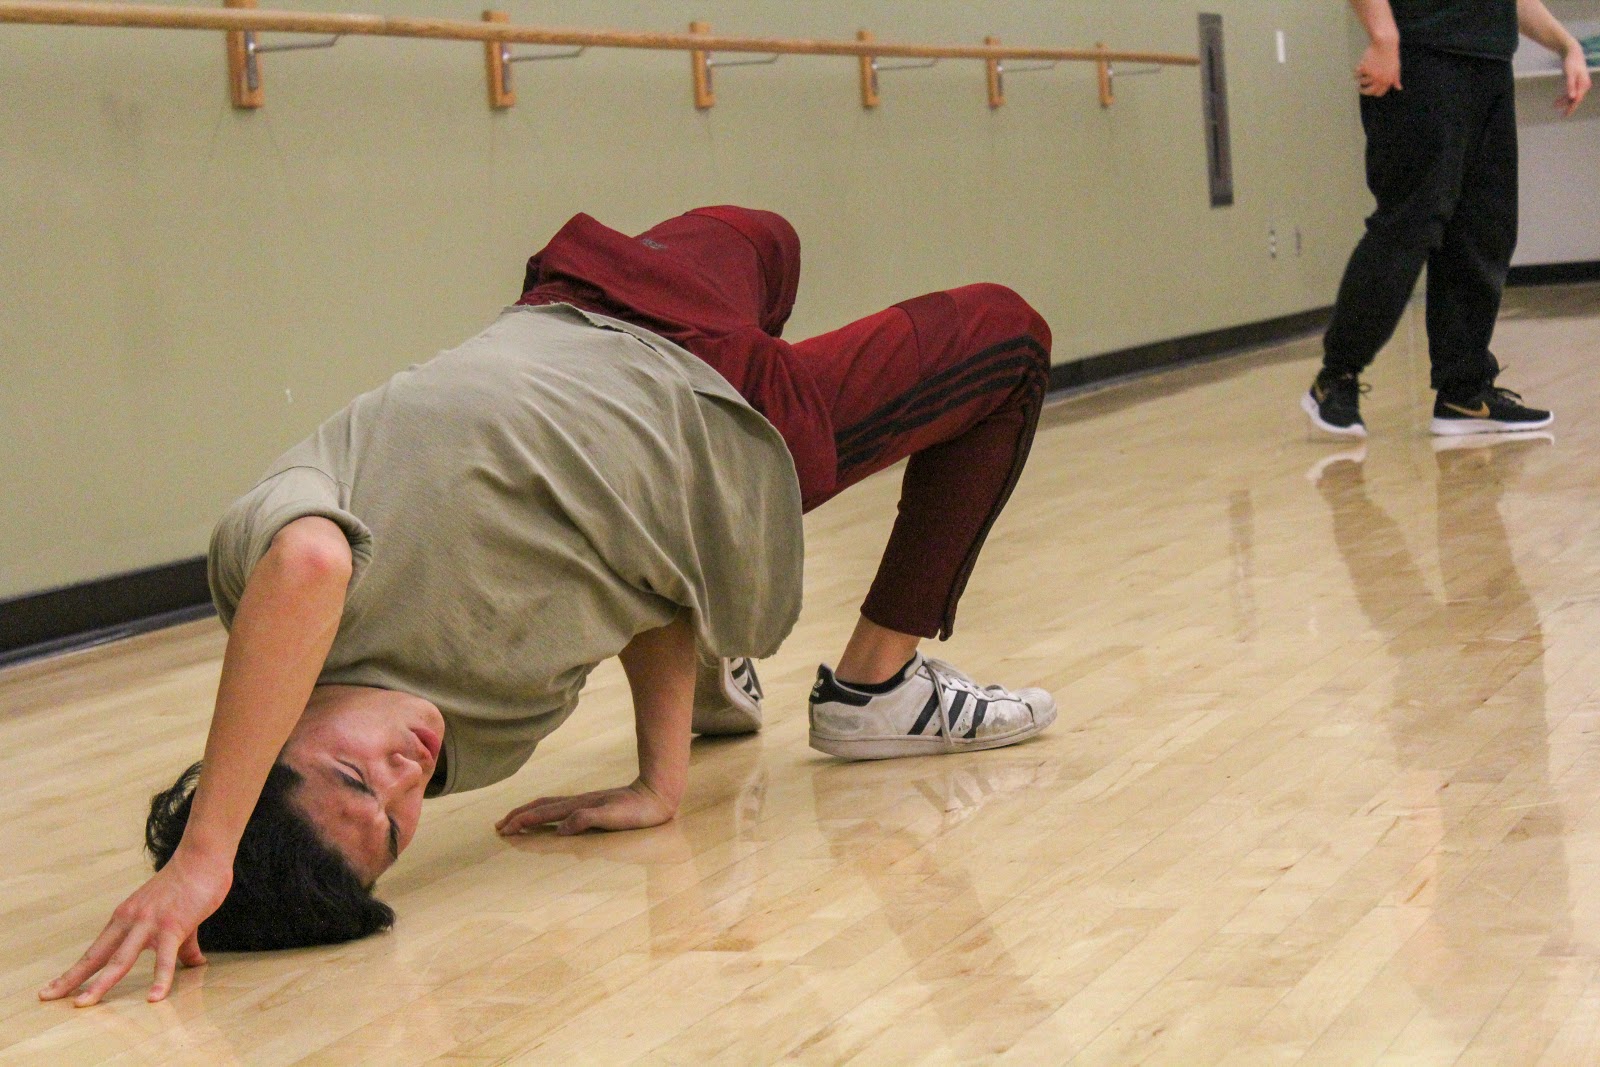 “Freestyle is a large part of breakdancing, and too many structured practices can limit creativity,” said Ivan Yen, a third year mechanical engineering major and the president of SLO Breakers. “So having a freeform practice every week gives our members a chance to be creative and work on their own moves.”